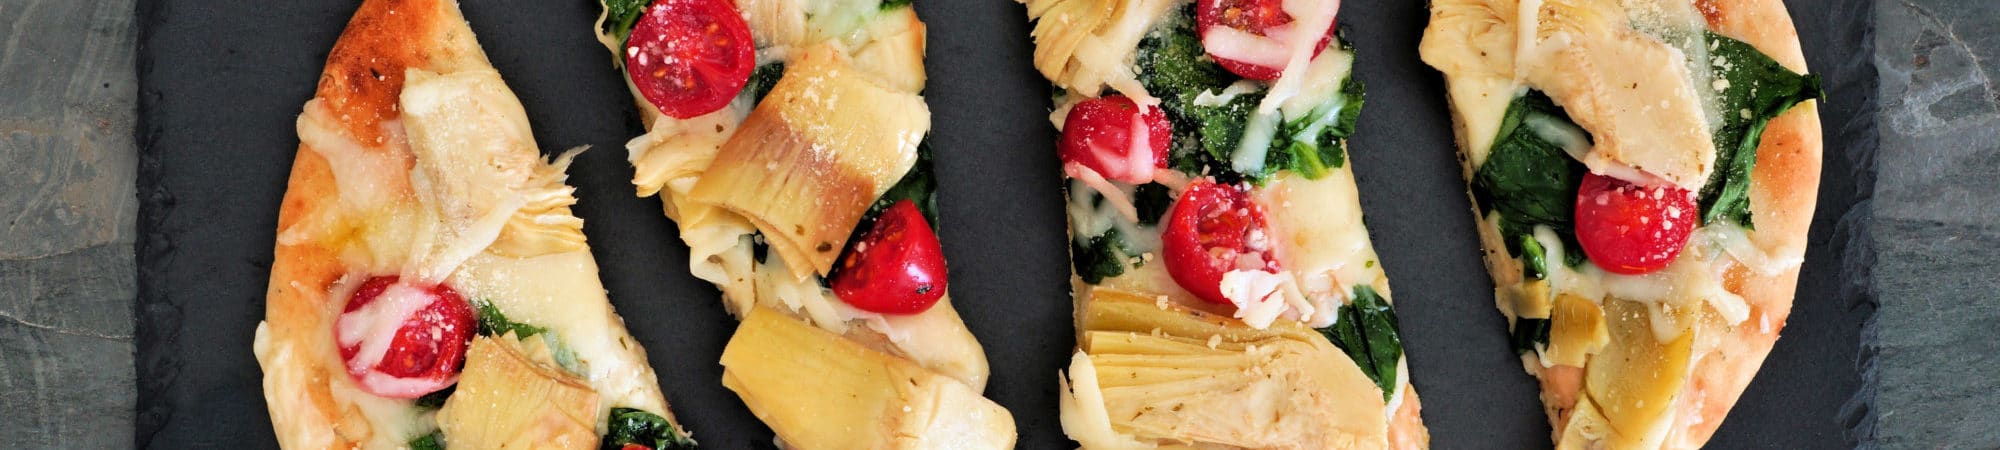 Flat bread pizza with melted mozzarella, tomatoes, spinach and artichokes